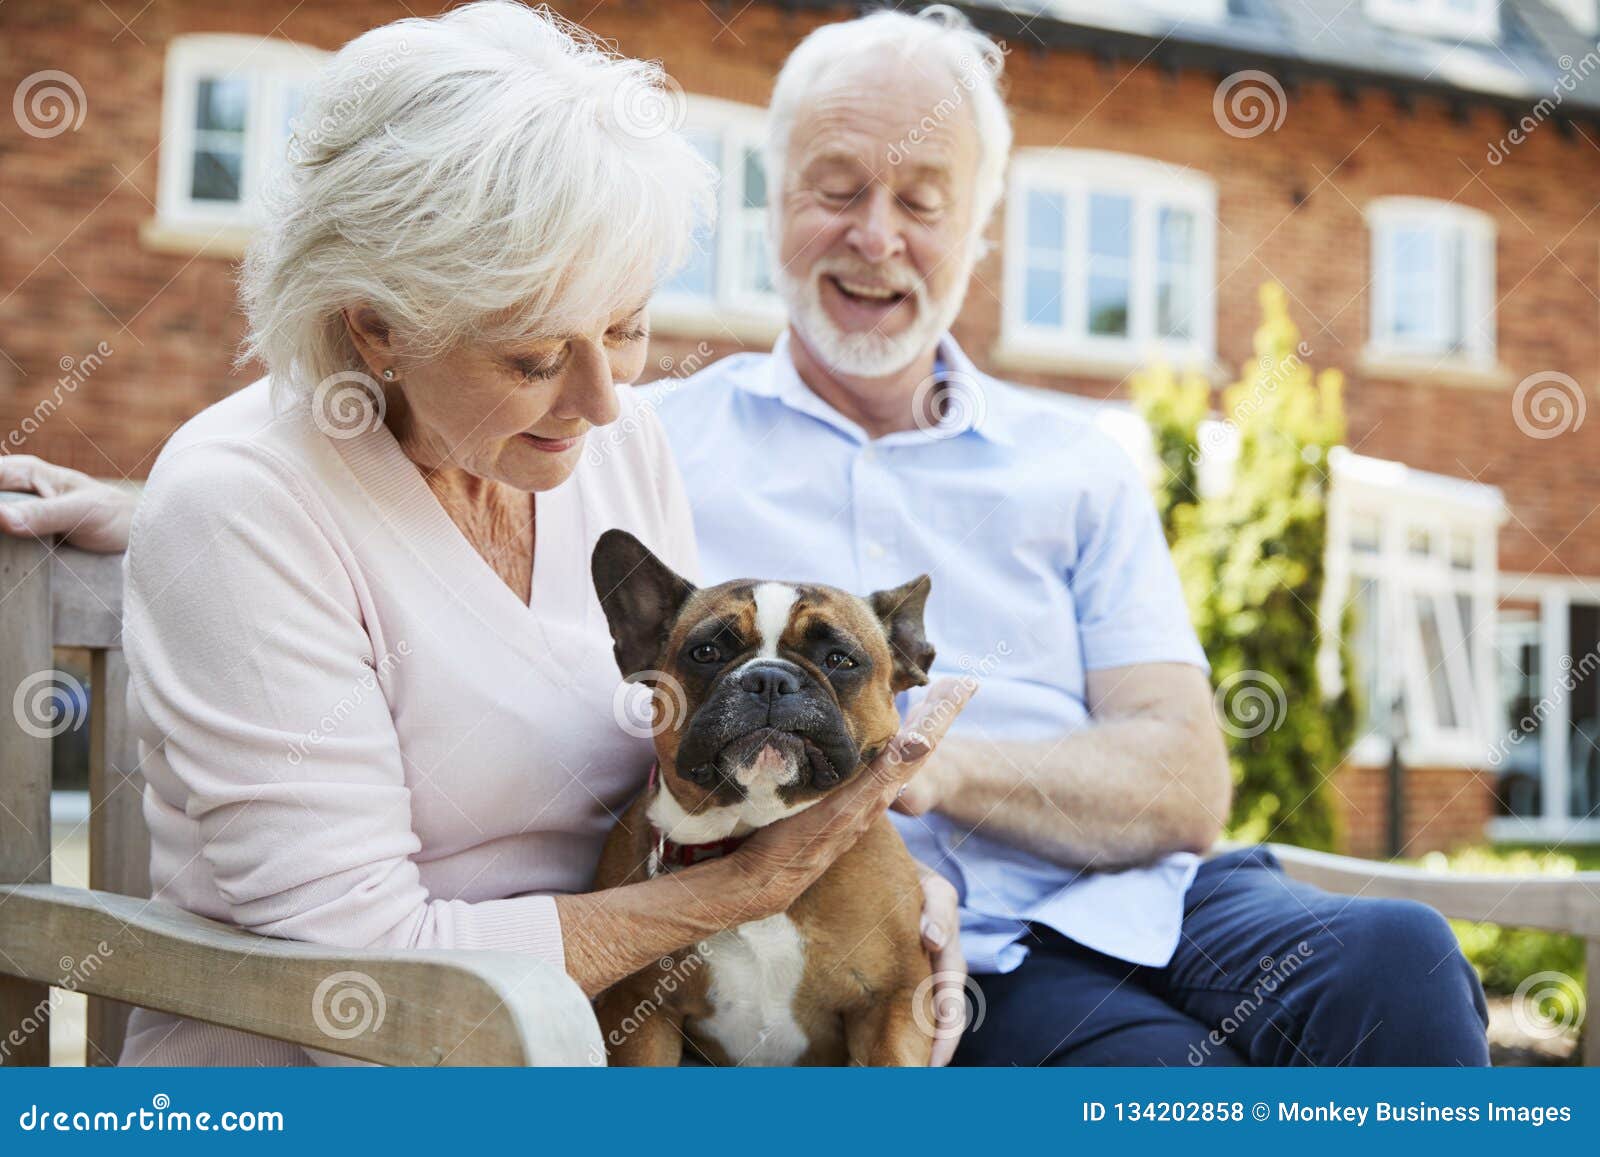 retired couple sitting on bench with pet french bulldog in assisted living facility